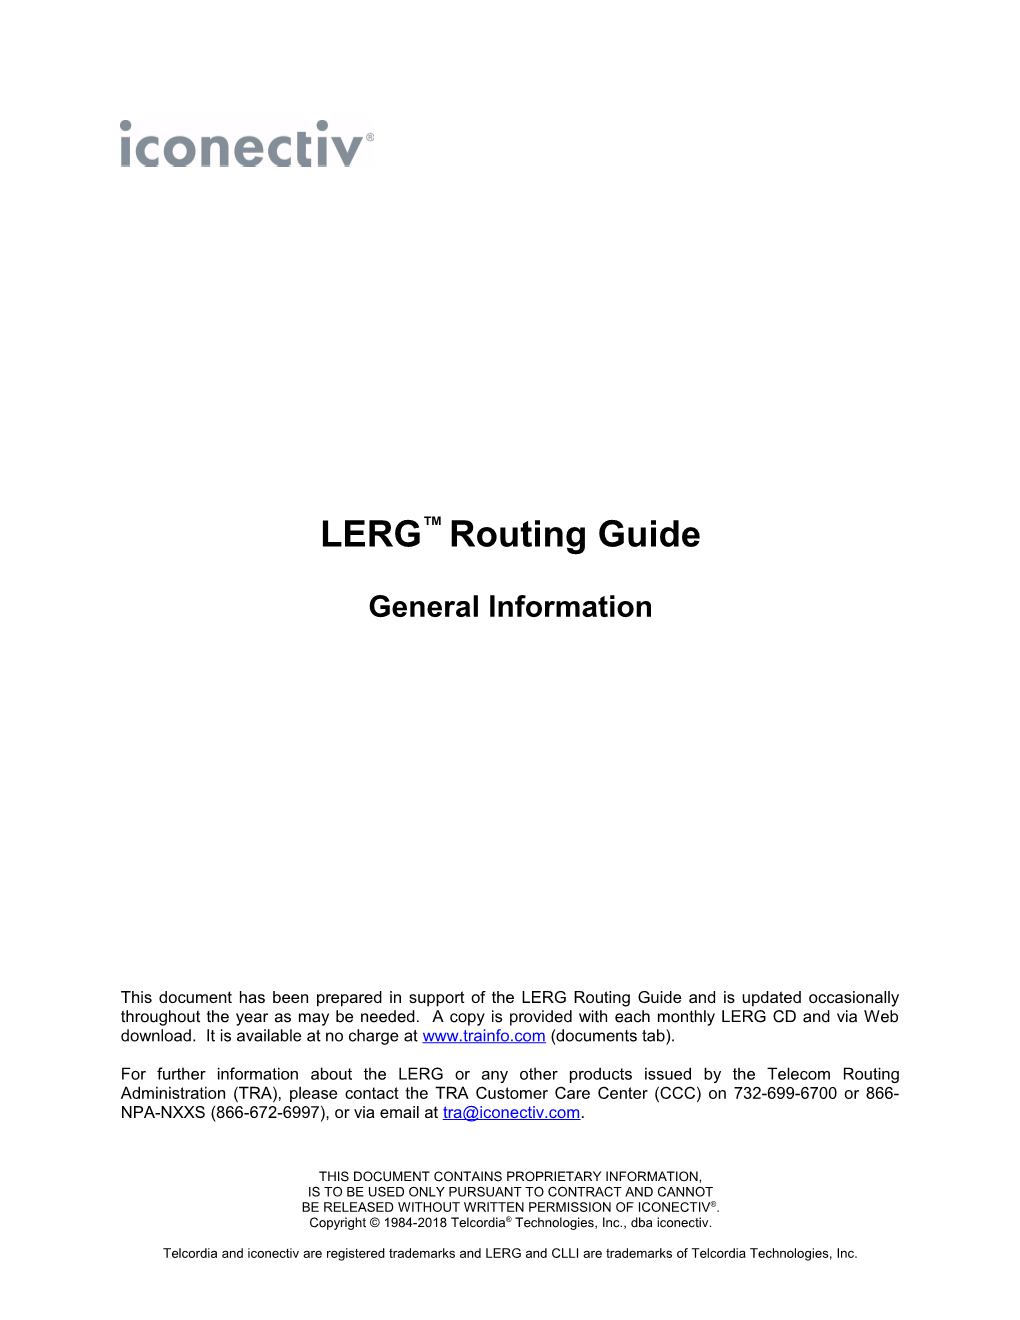 LERG Routing Guide